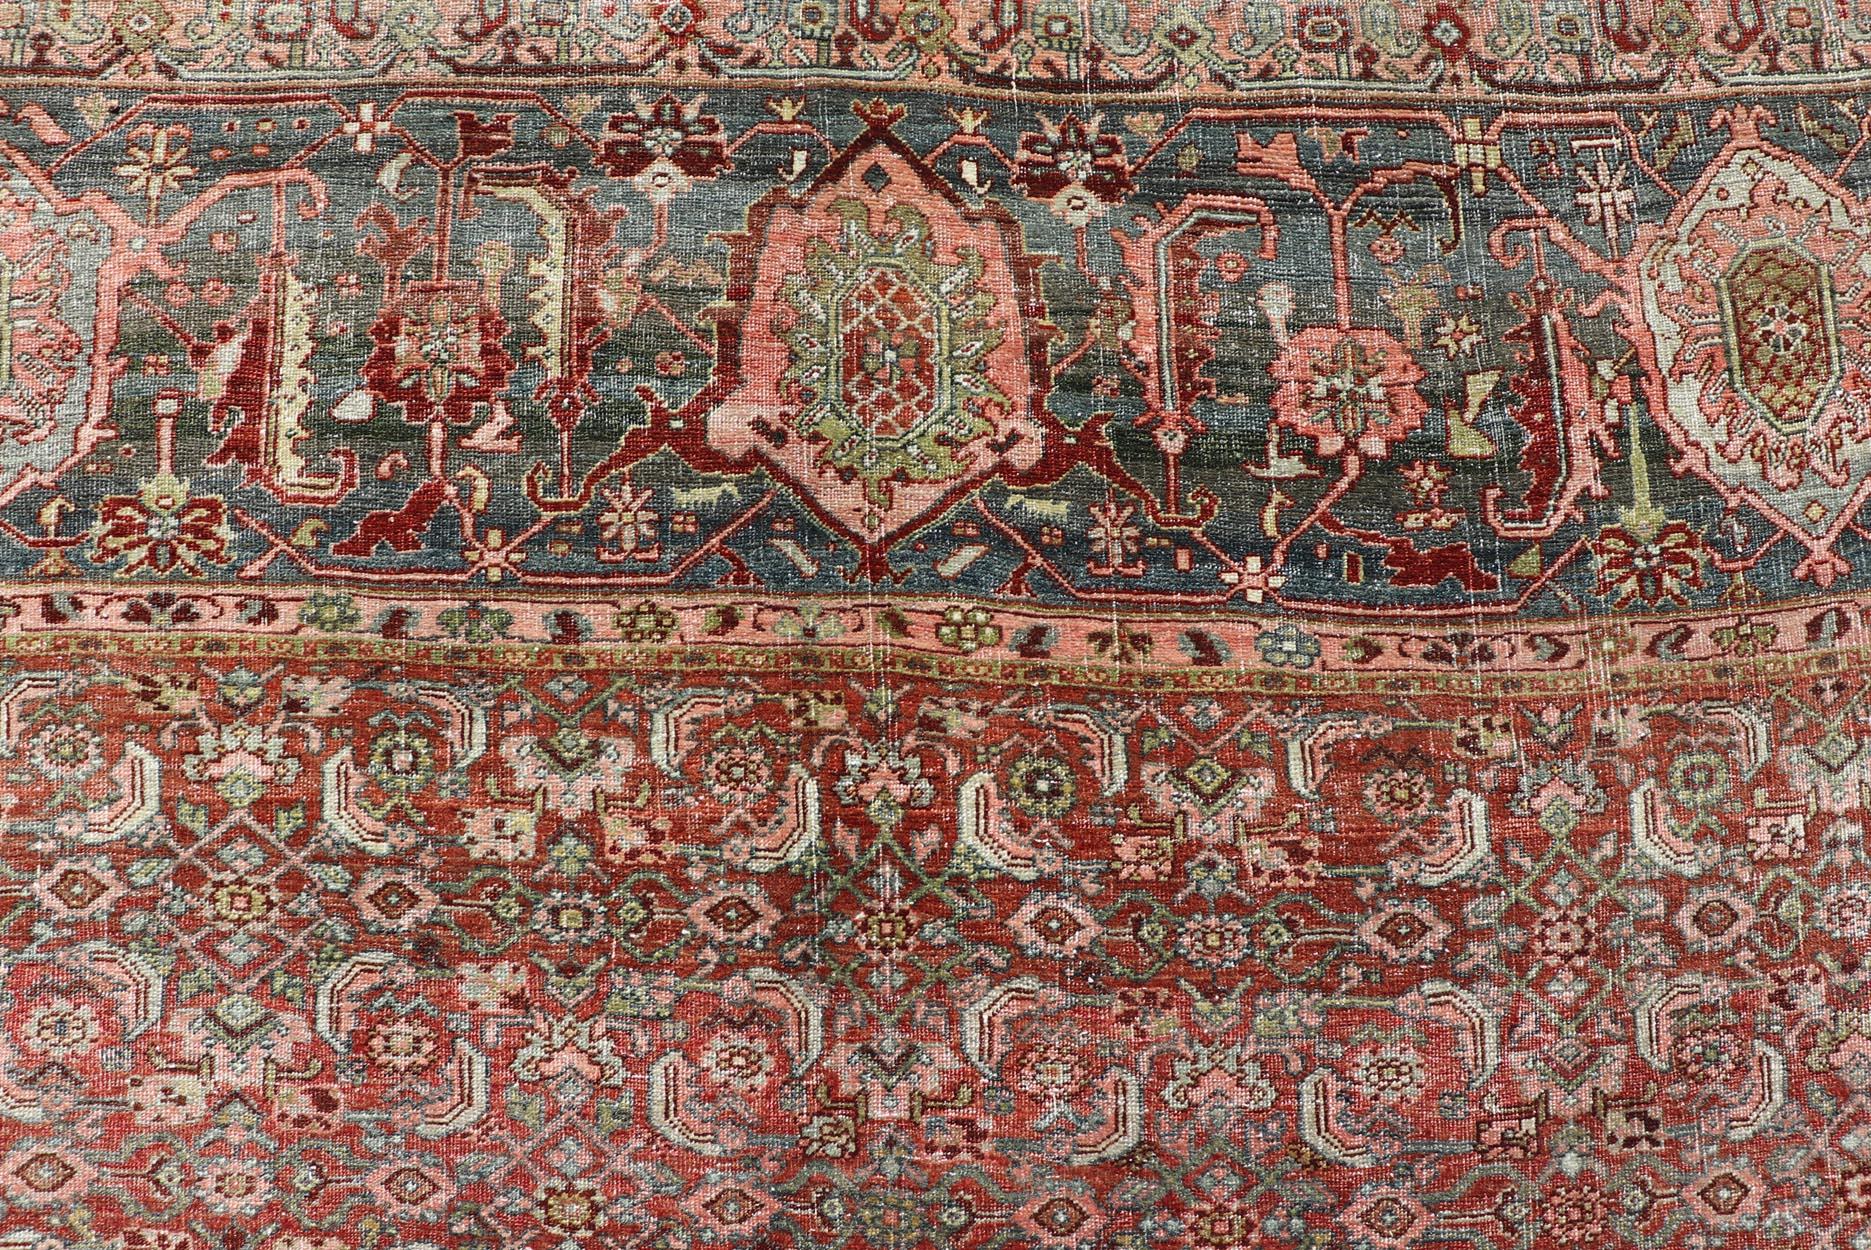 Palace Size Antique Persian Bidjar Rug in Shades of Red, Blue Grey & Lime Green For Sale 3